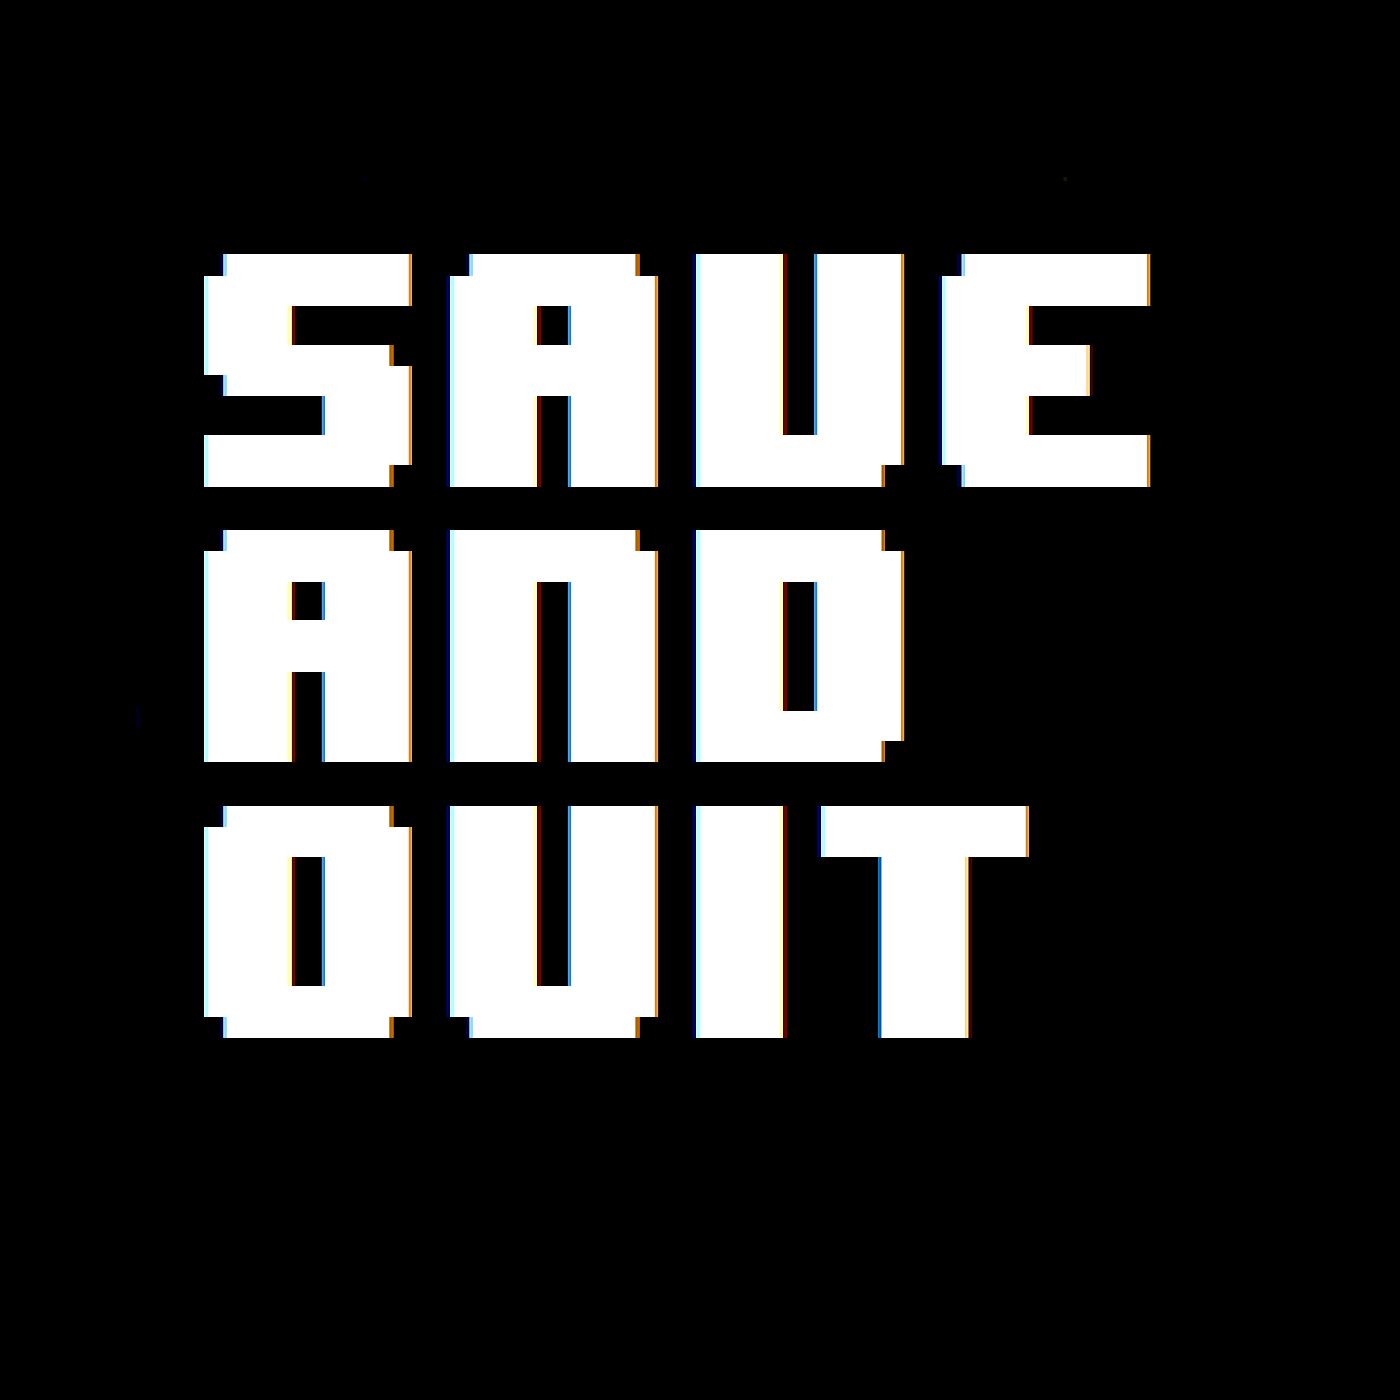 Save and Quit